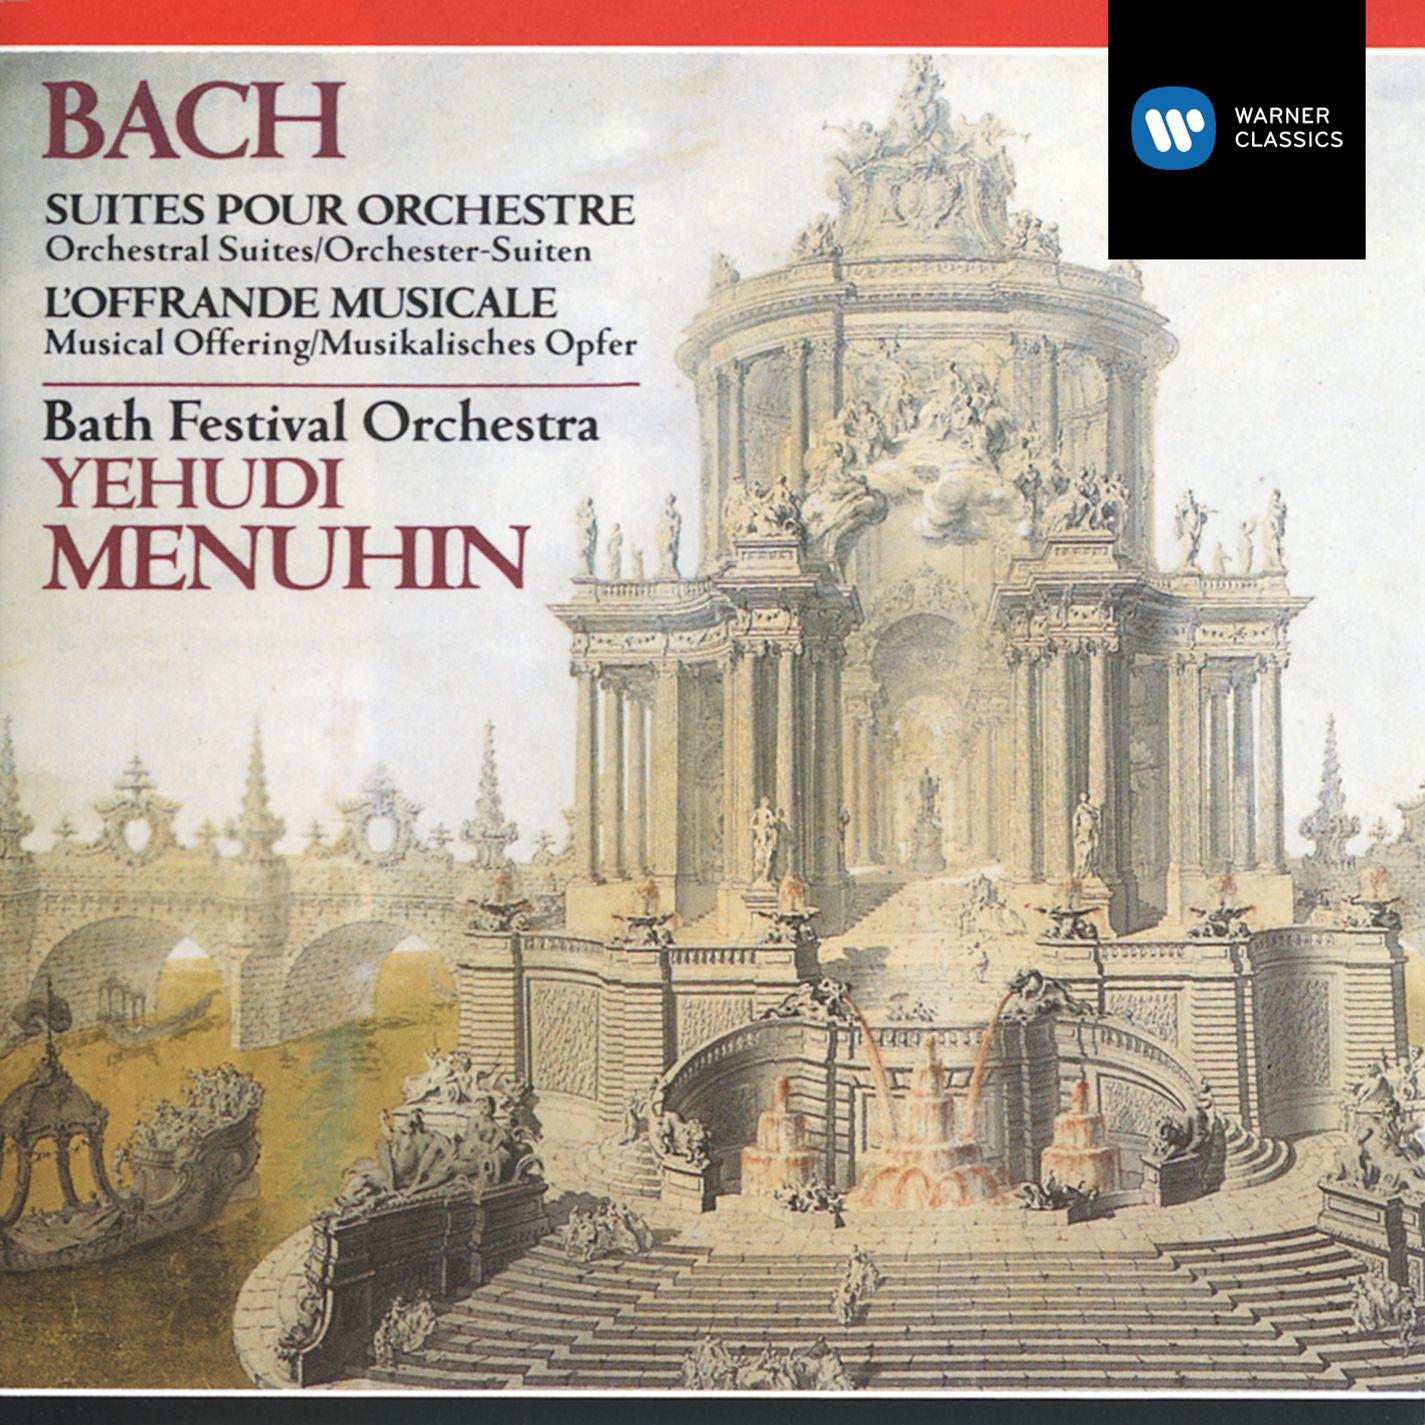 Bach: Orchestral Suites Nos. 1 - 4 & Musical Offering